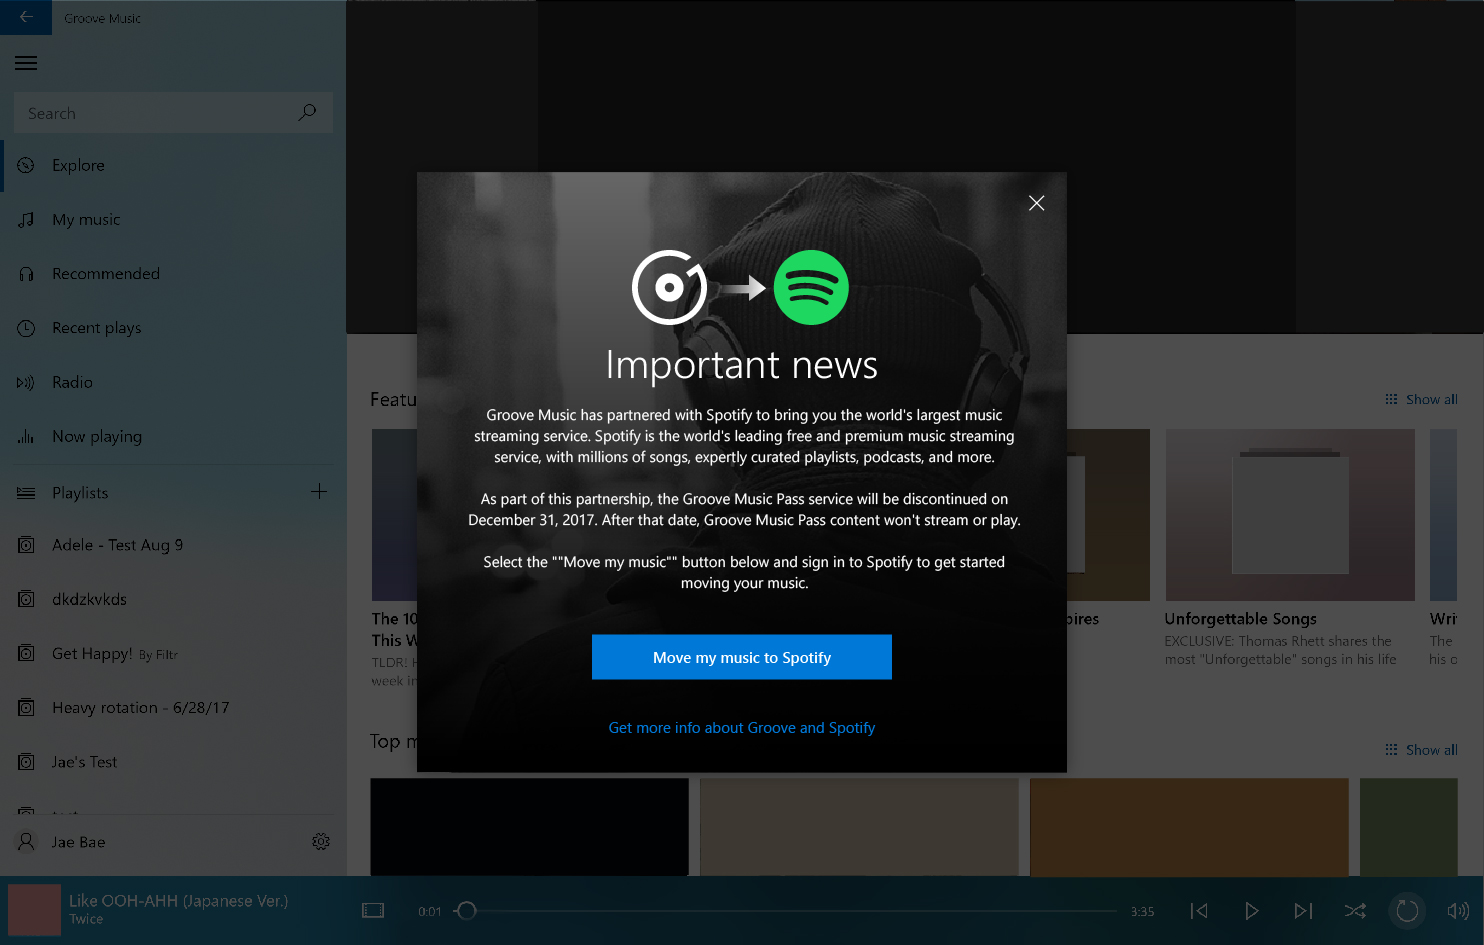 Microsoft is shutting down Groove Music in favor of Spotify